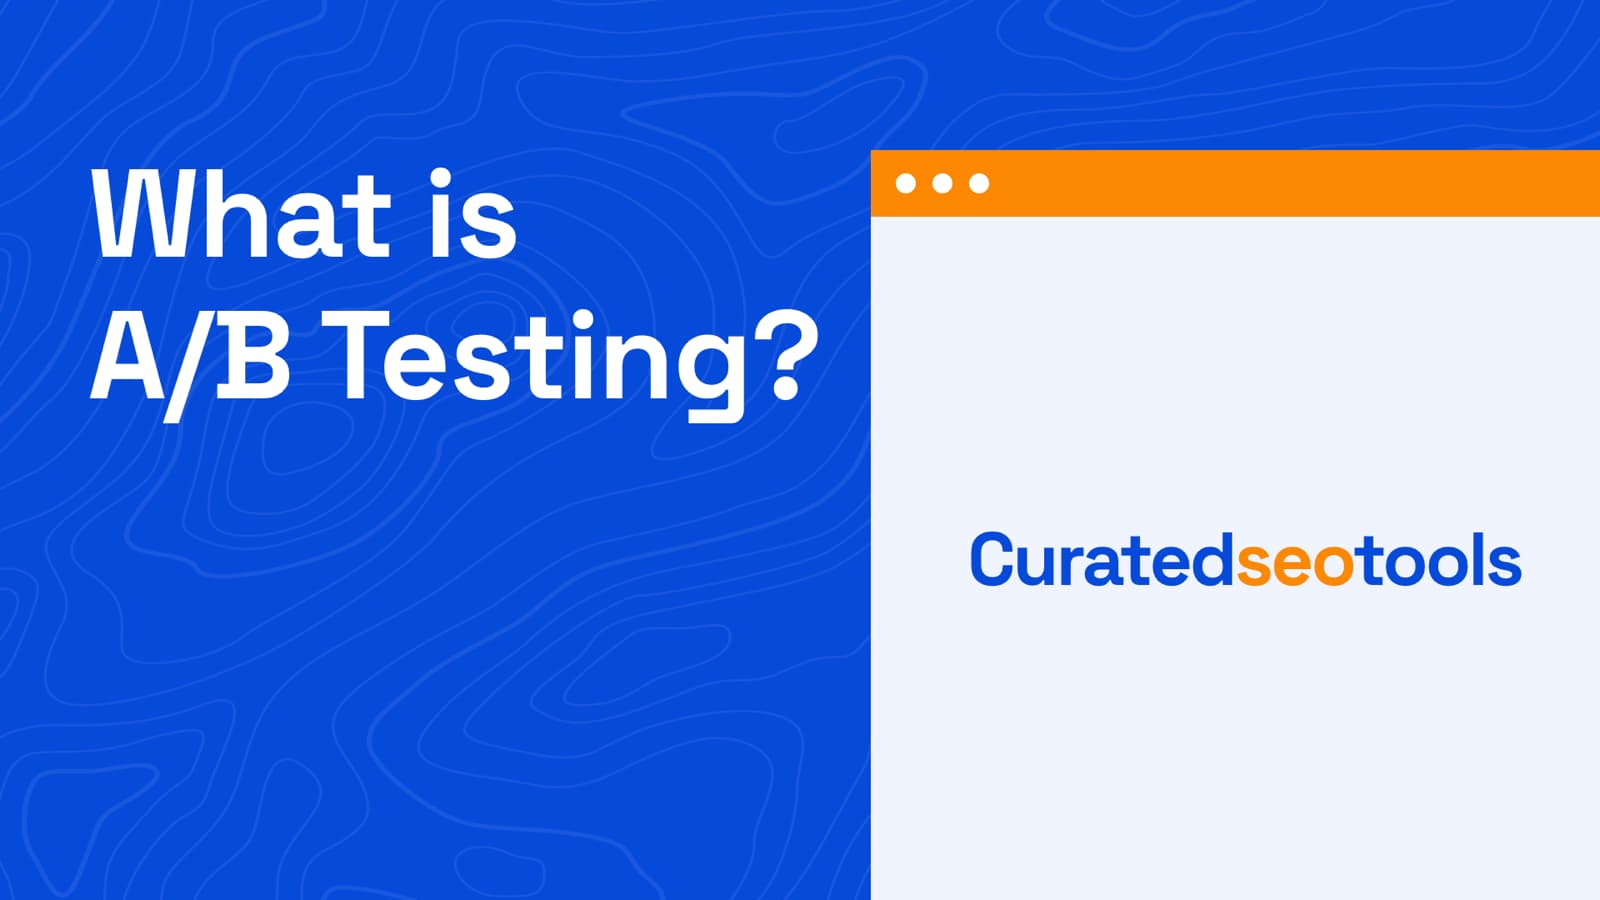 The cover image about the content title which is "What is A/B testing?" and a browser shaped graphic element